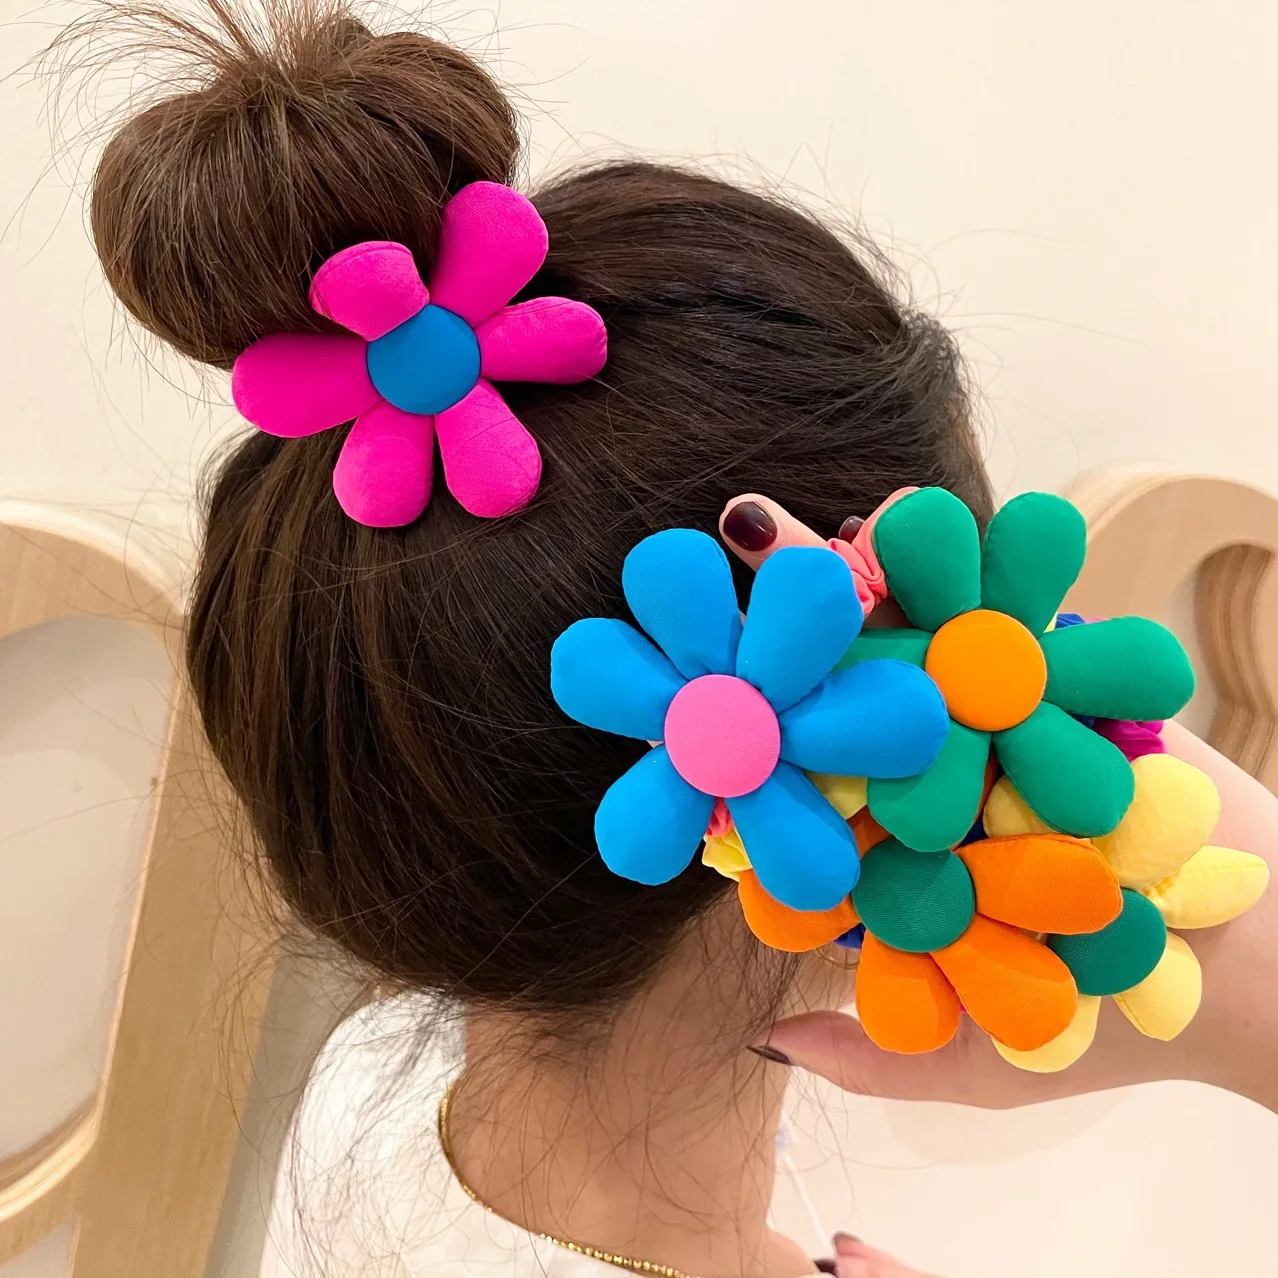 

New Korea Exaggerated Sponge Flower Girl Hair Accessories Elastic Hair Bands Rubber Bands Baby Kids Soft Fabric Floral Hair Rope